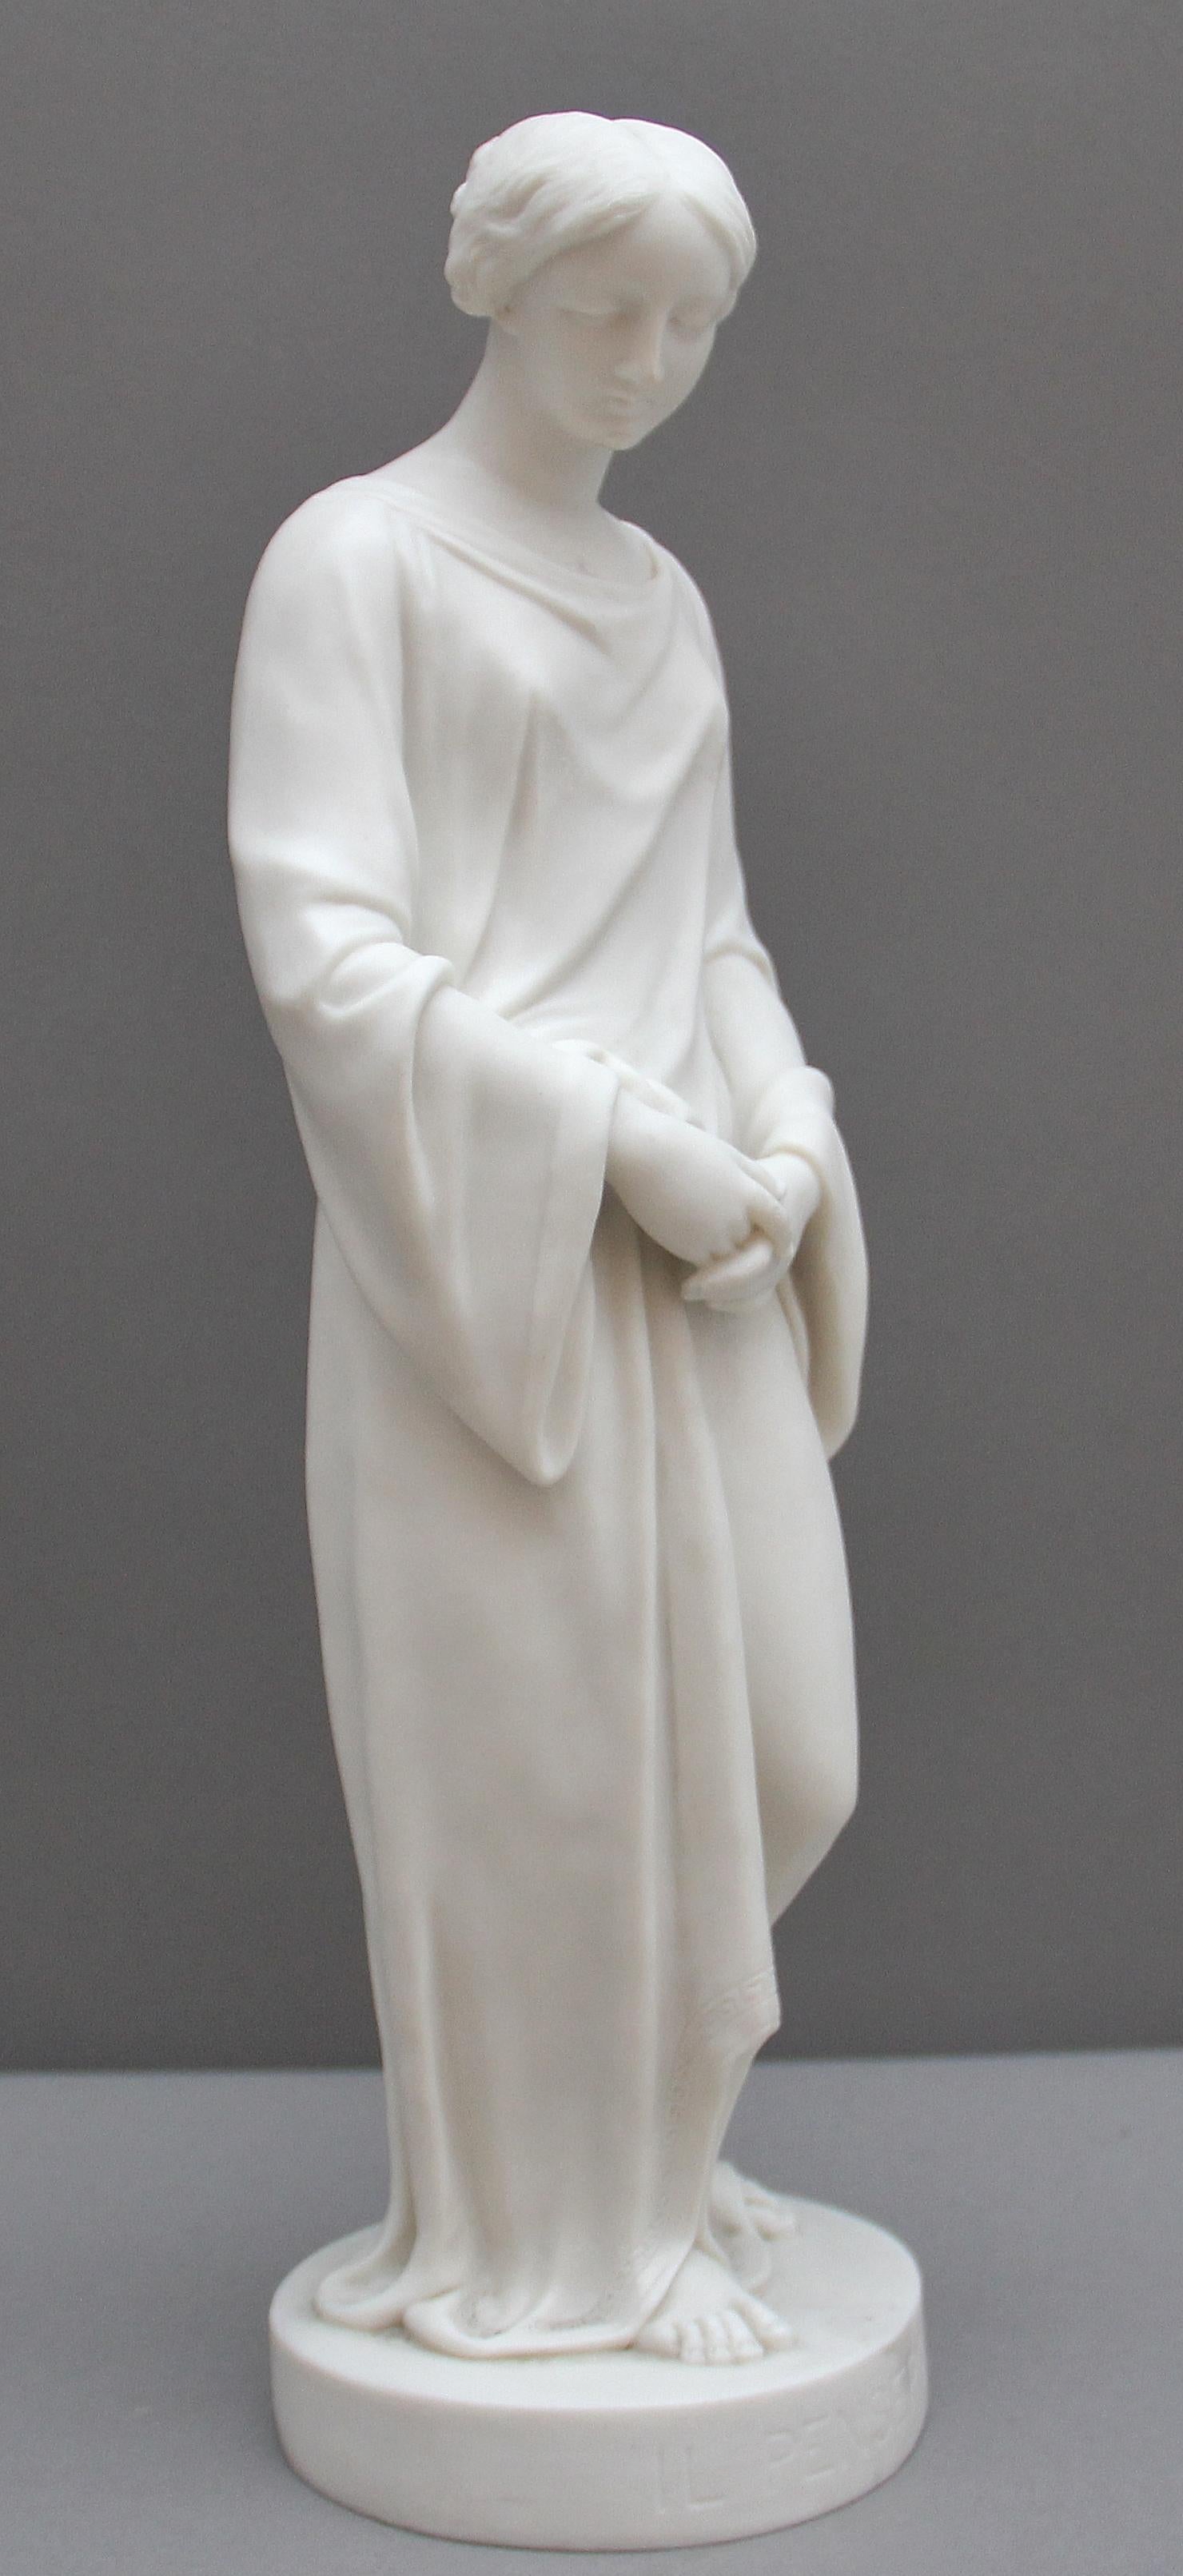 19th century parian figure attributed to Worcester “Il Penseroso” A draped female figure with downcast eyes standing on a circular base named Il Penseroso and signed Papworth. In very good condition with minor damage to the base (see photo) circa